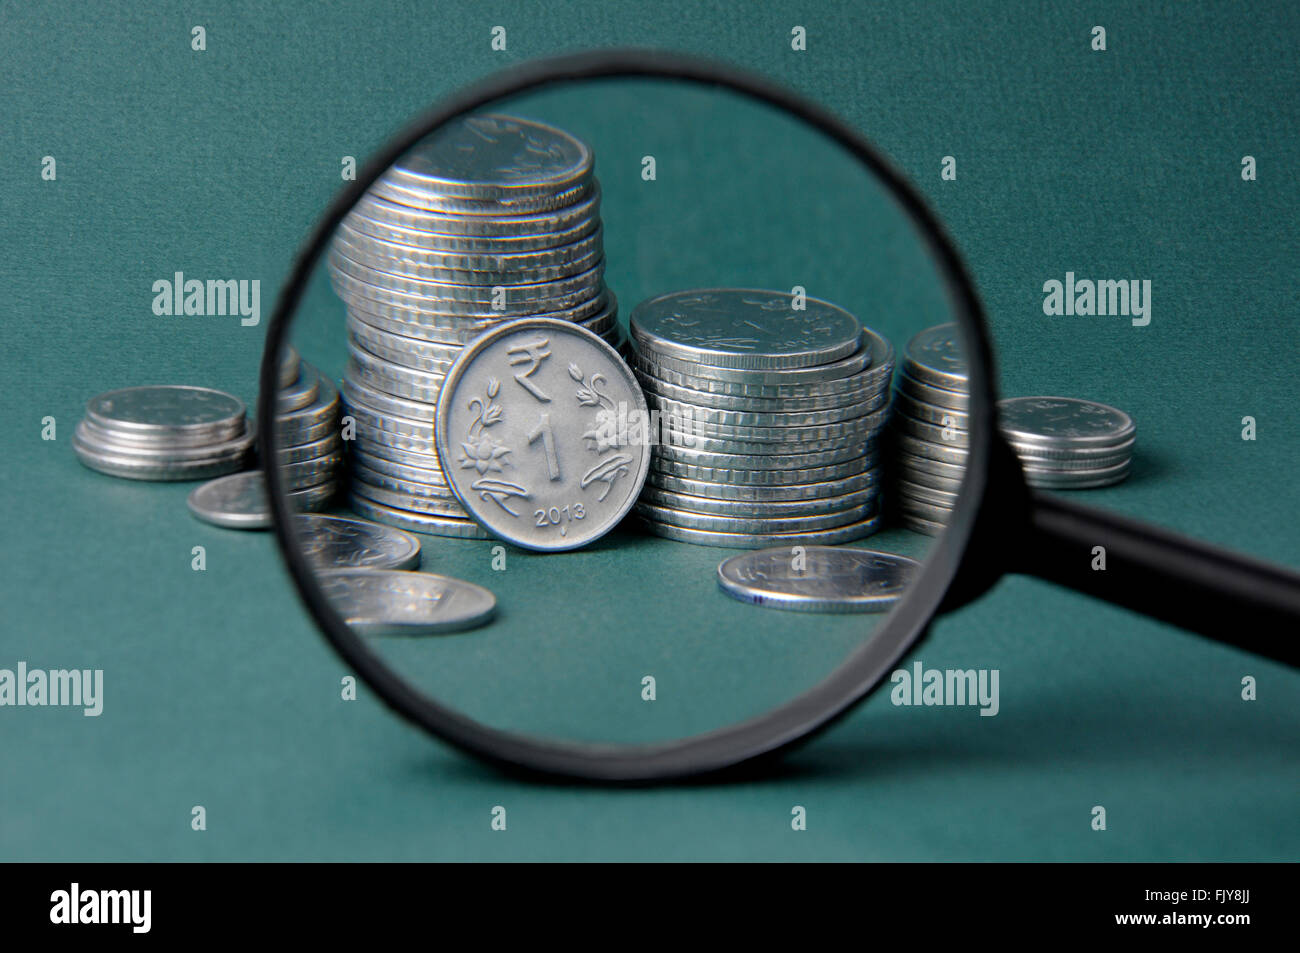 Magnifier and coins Stock Photo